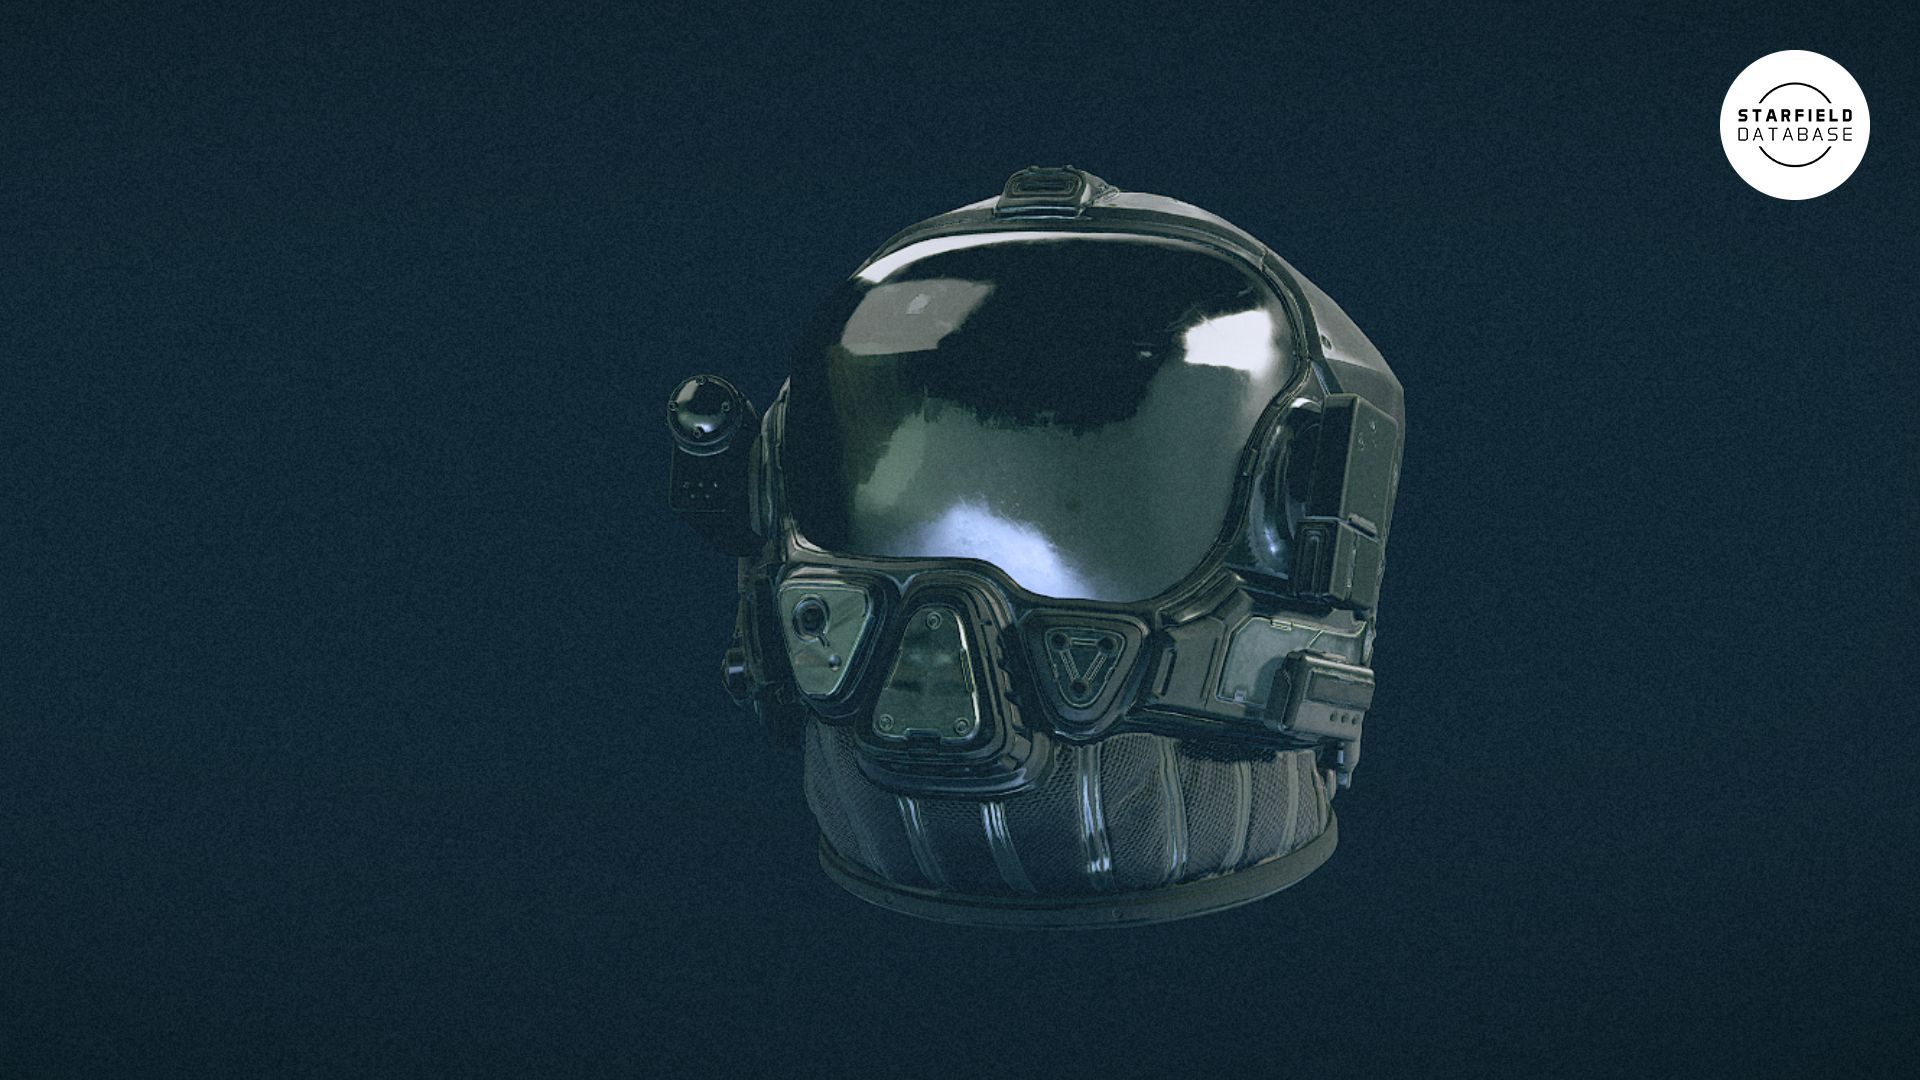 Galactic Rubble Space Wars Helmet from the Stars